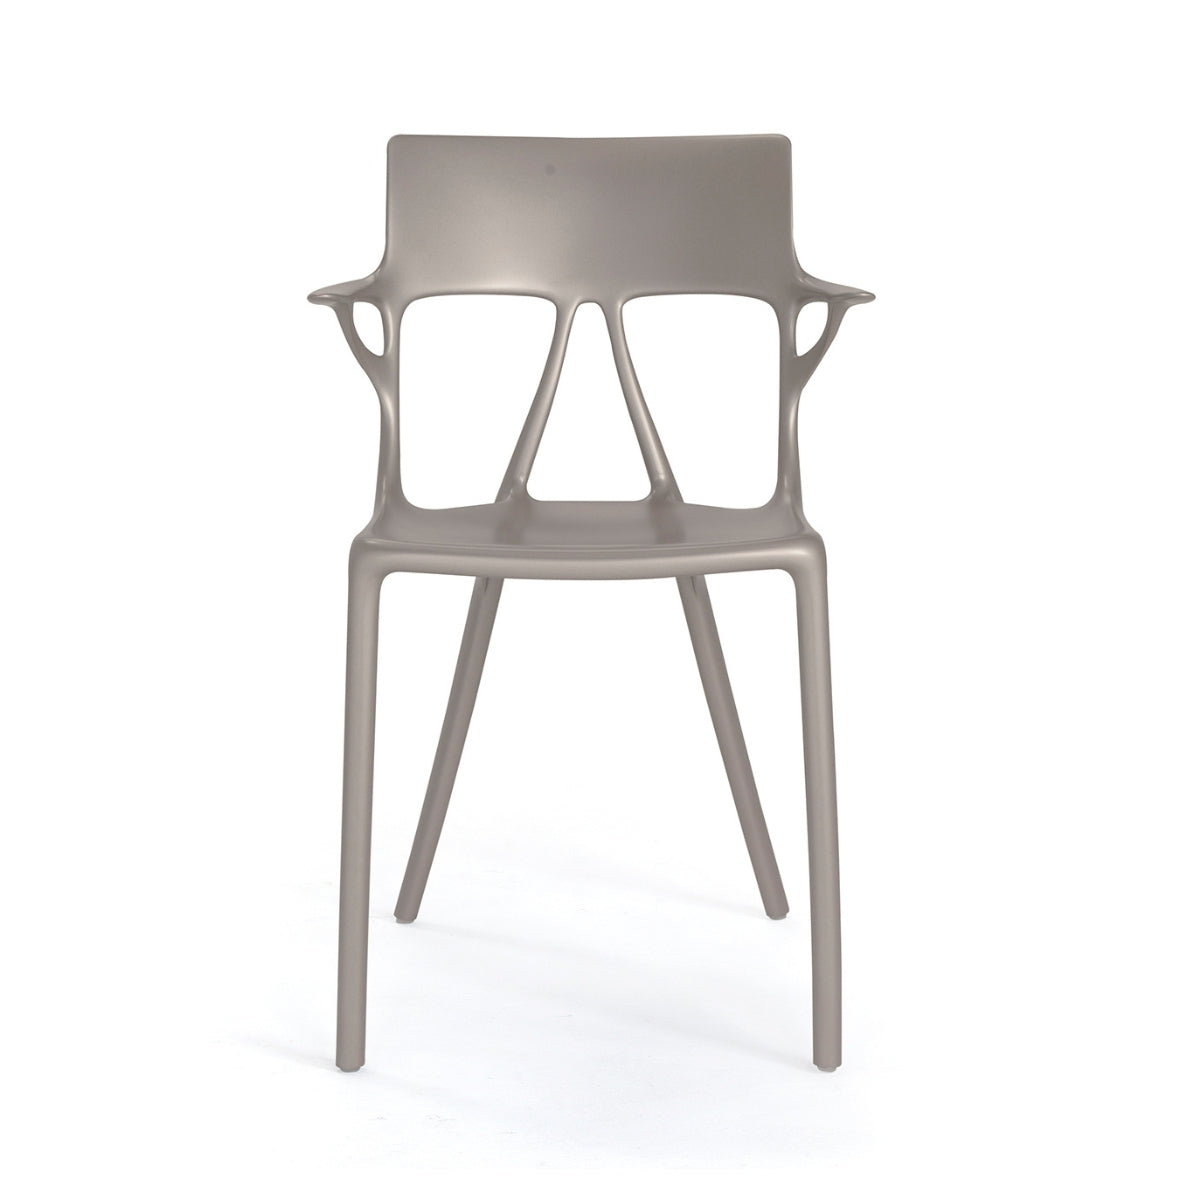 A.I. Chair - Kartell